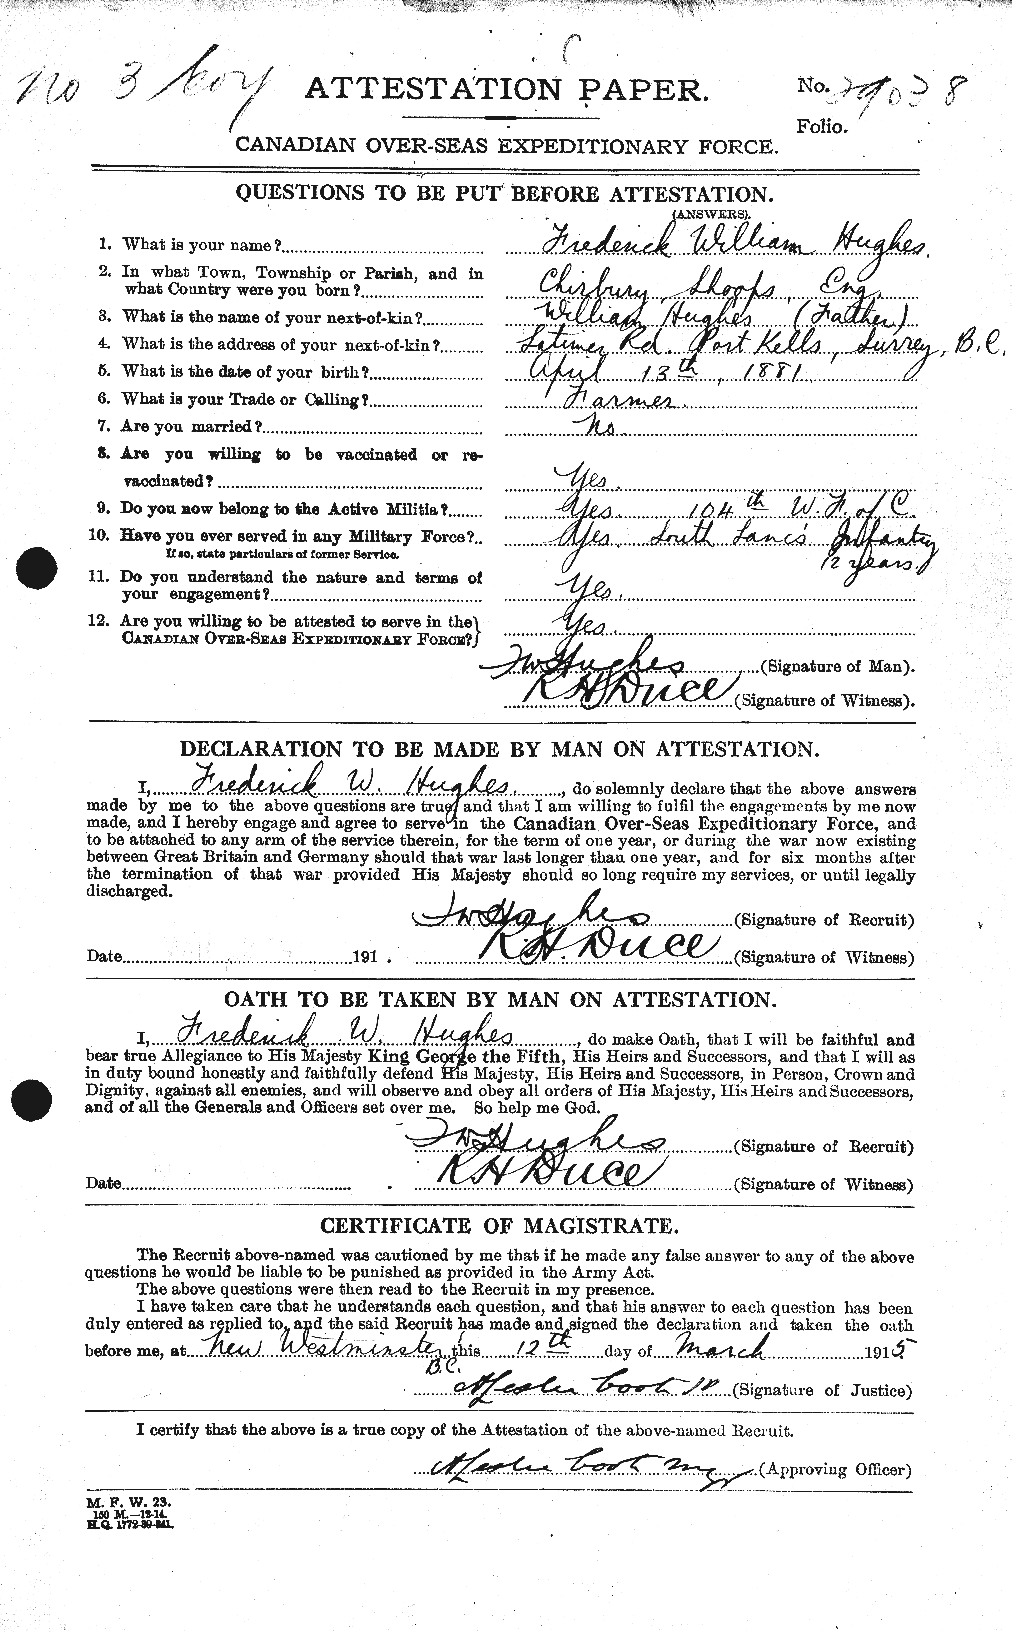 Personnel Records of the First World War - CEF 403805a